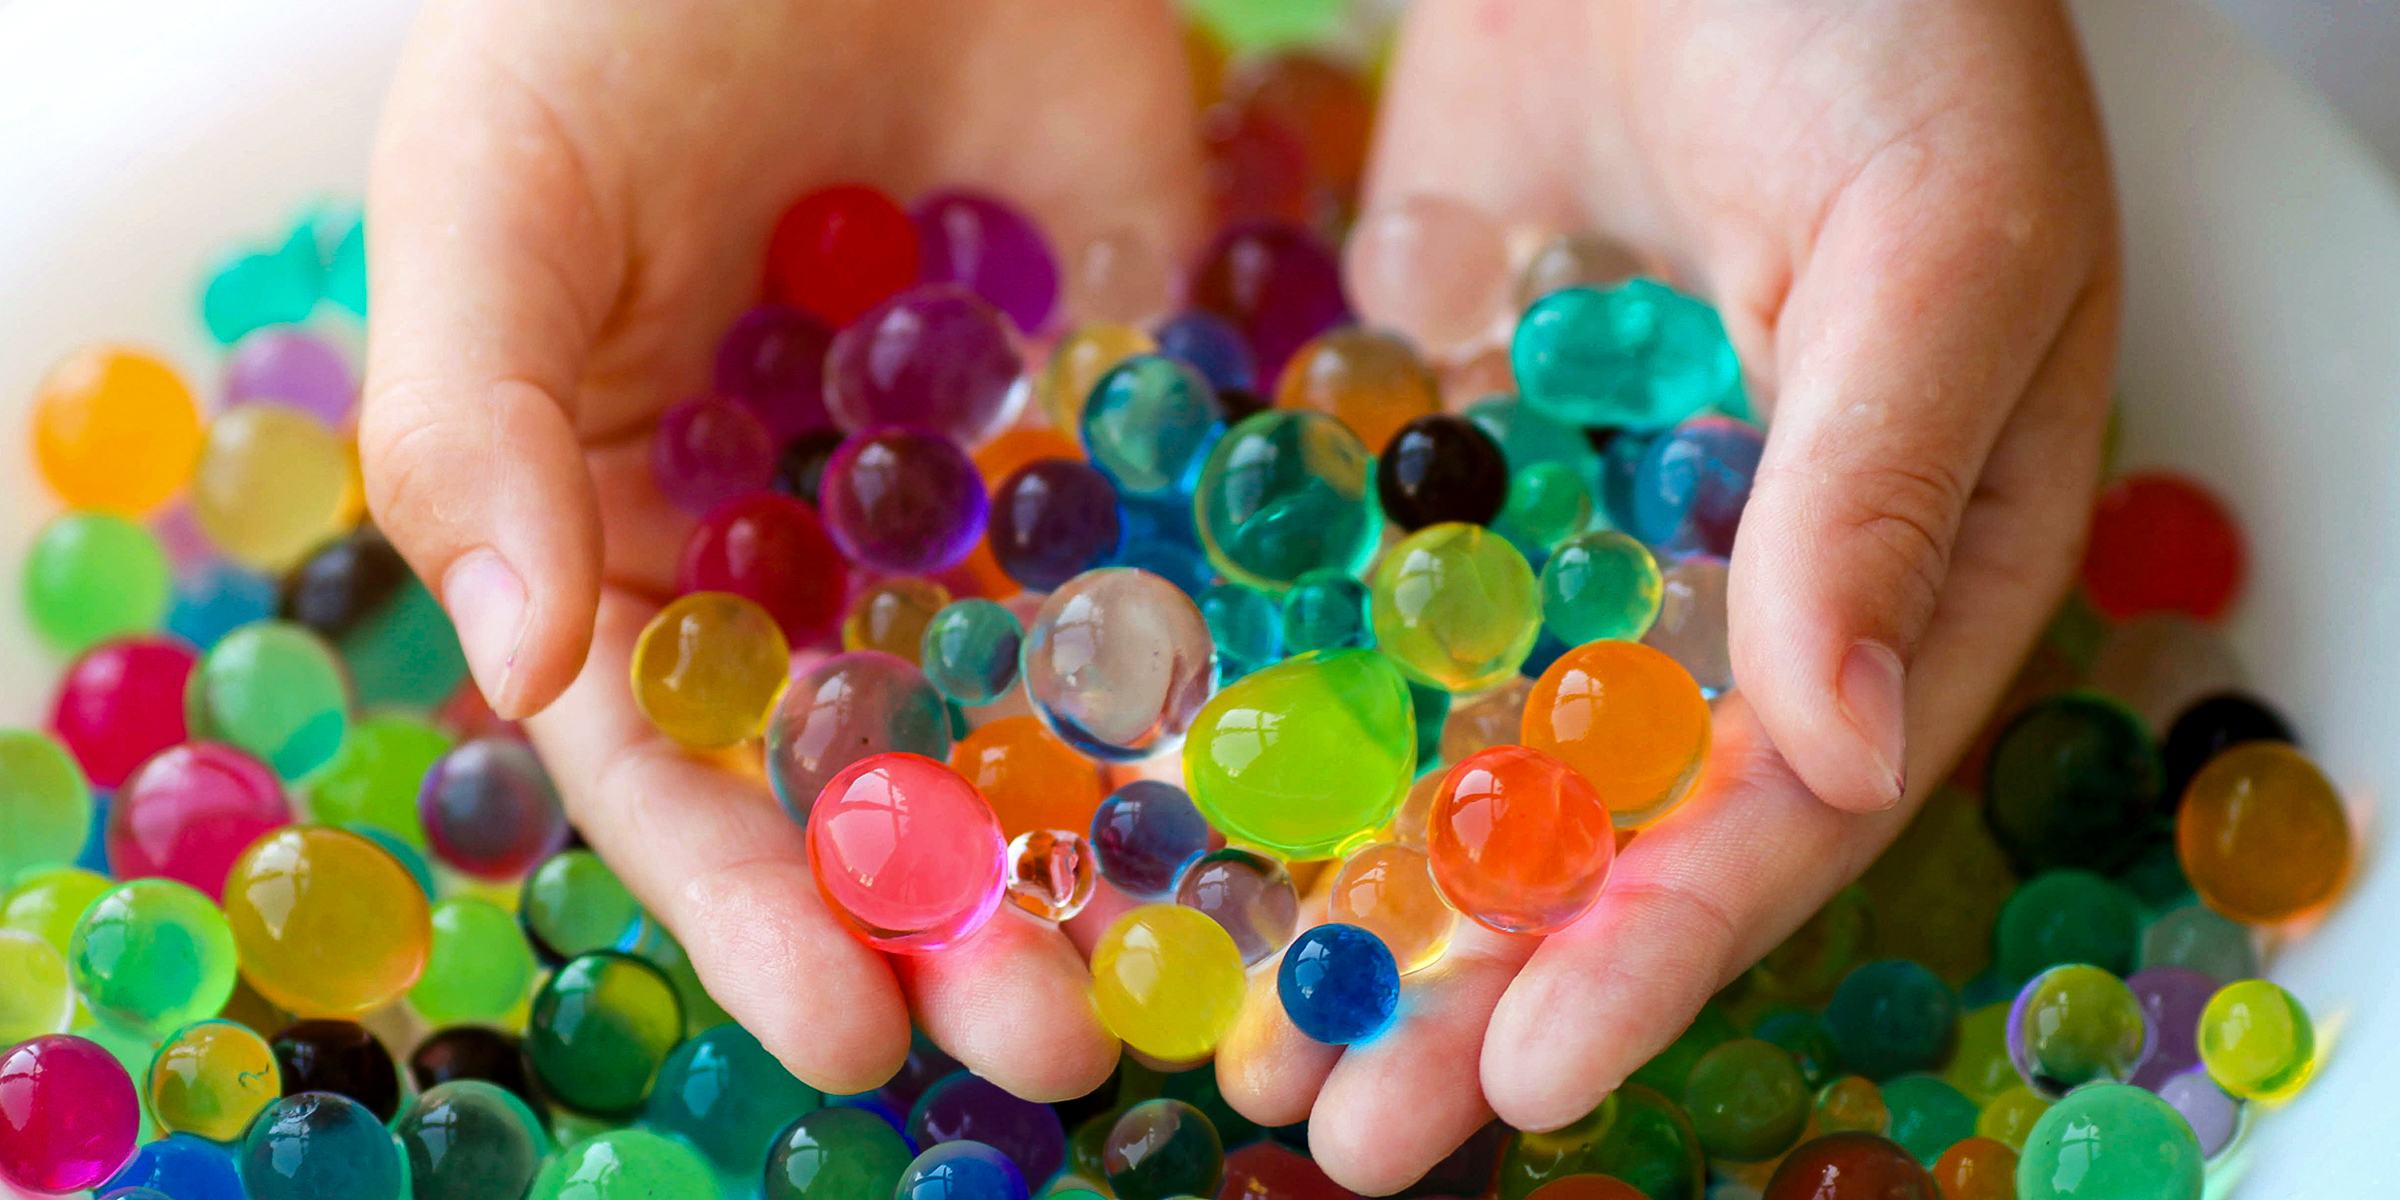 A bowl of Orbeez | Source: Shutterstock